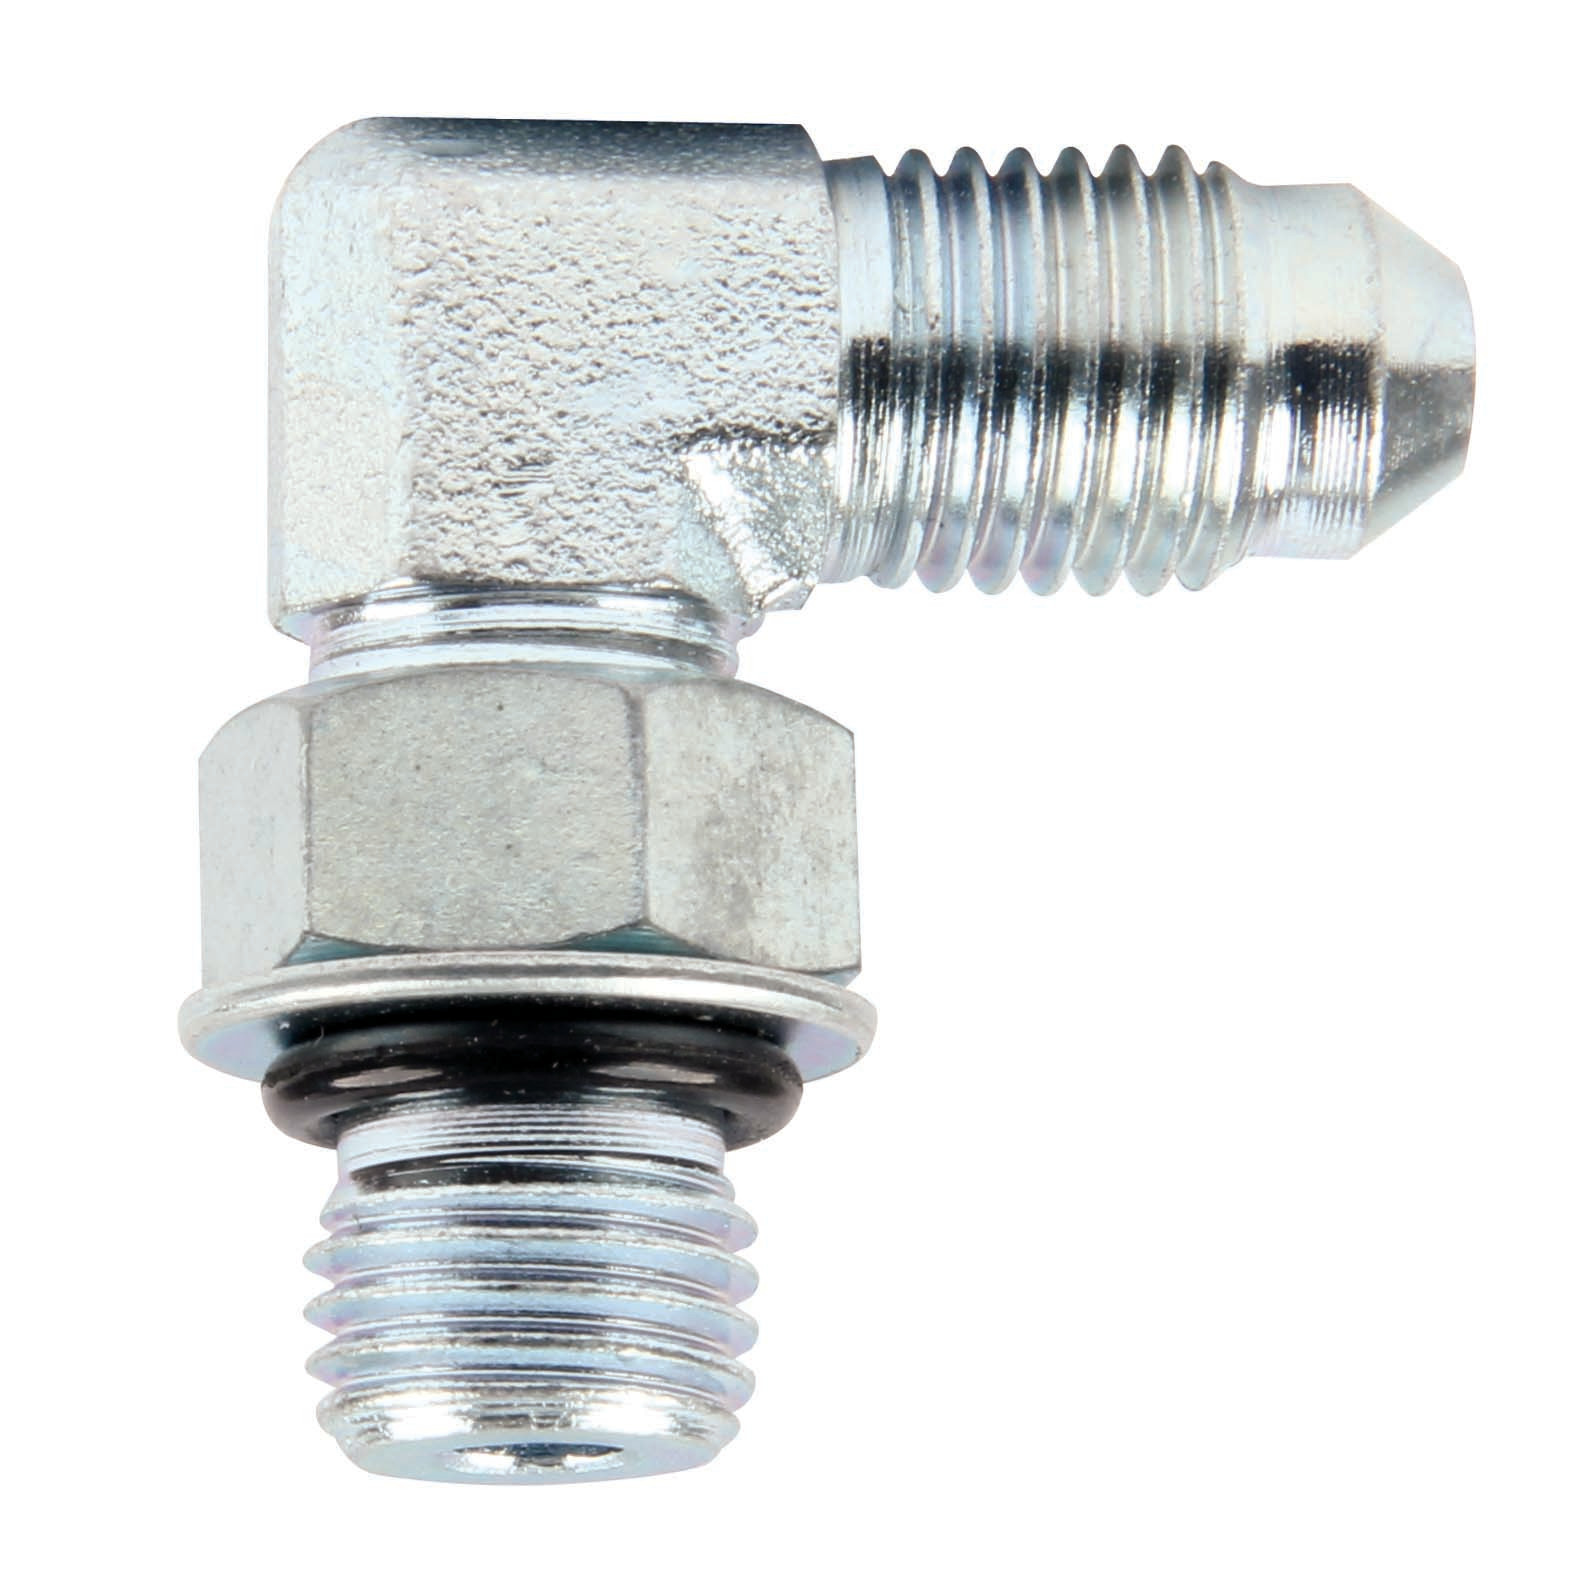 Adapter Fittings -4 to 7/16-20 90 Degree 2pk